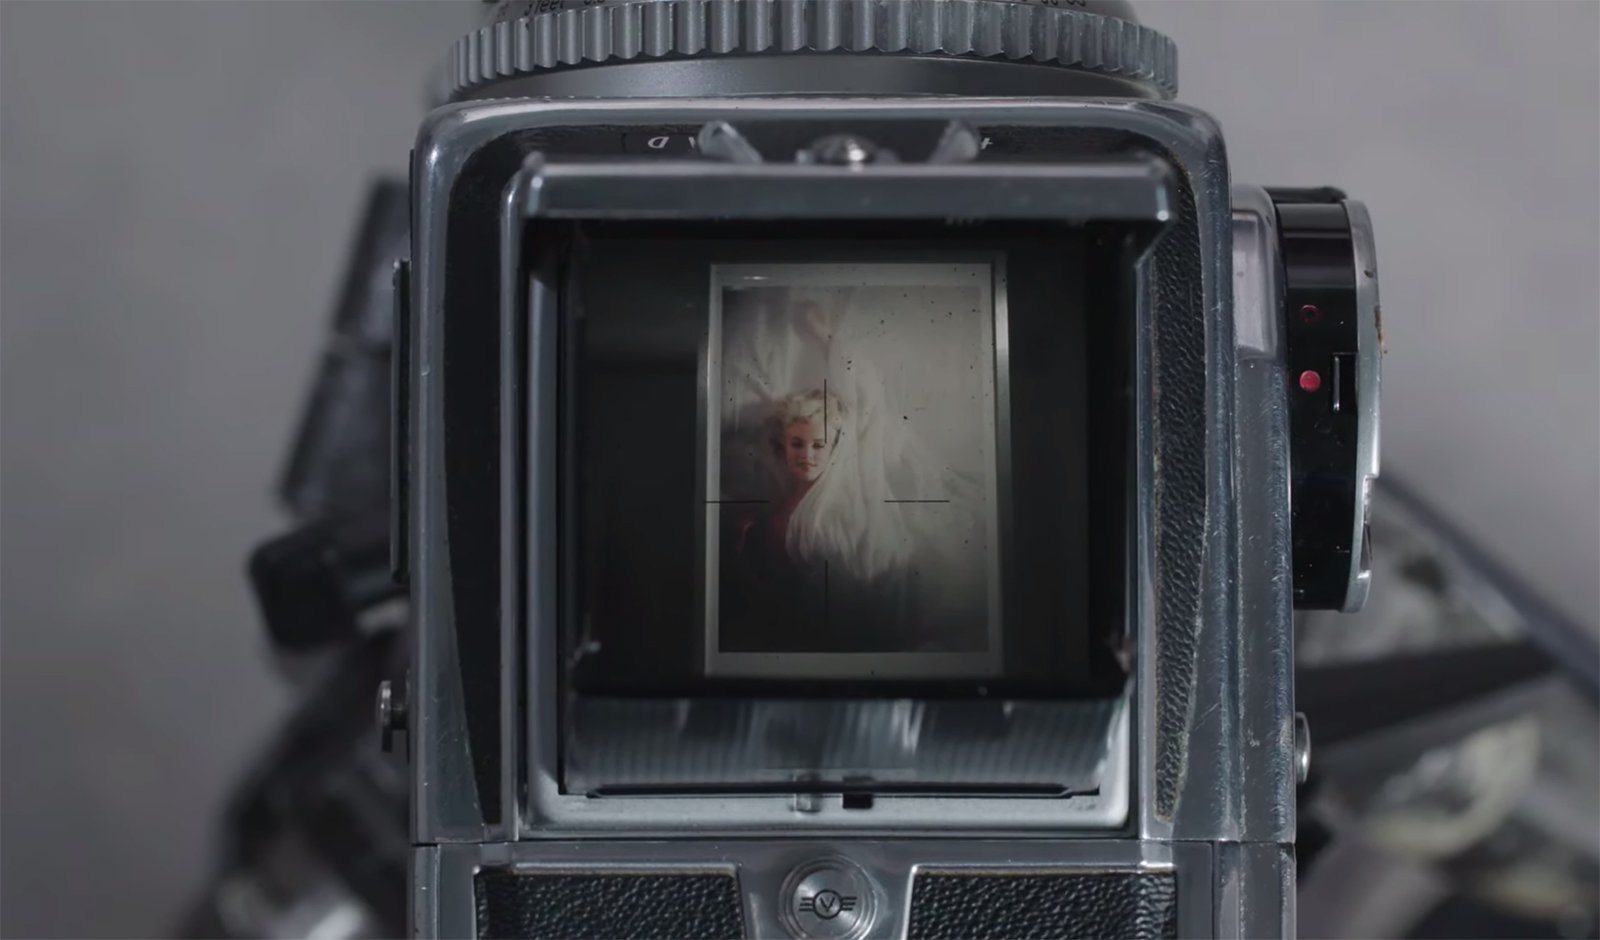 Hasselblad from Iconic Marilyn Monroe Shoot Expected to Sell for $300,000